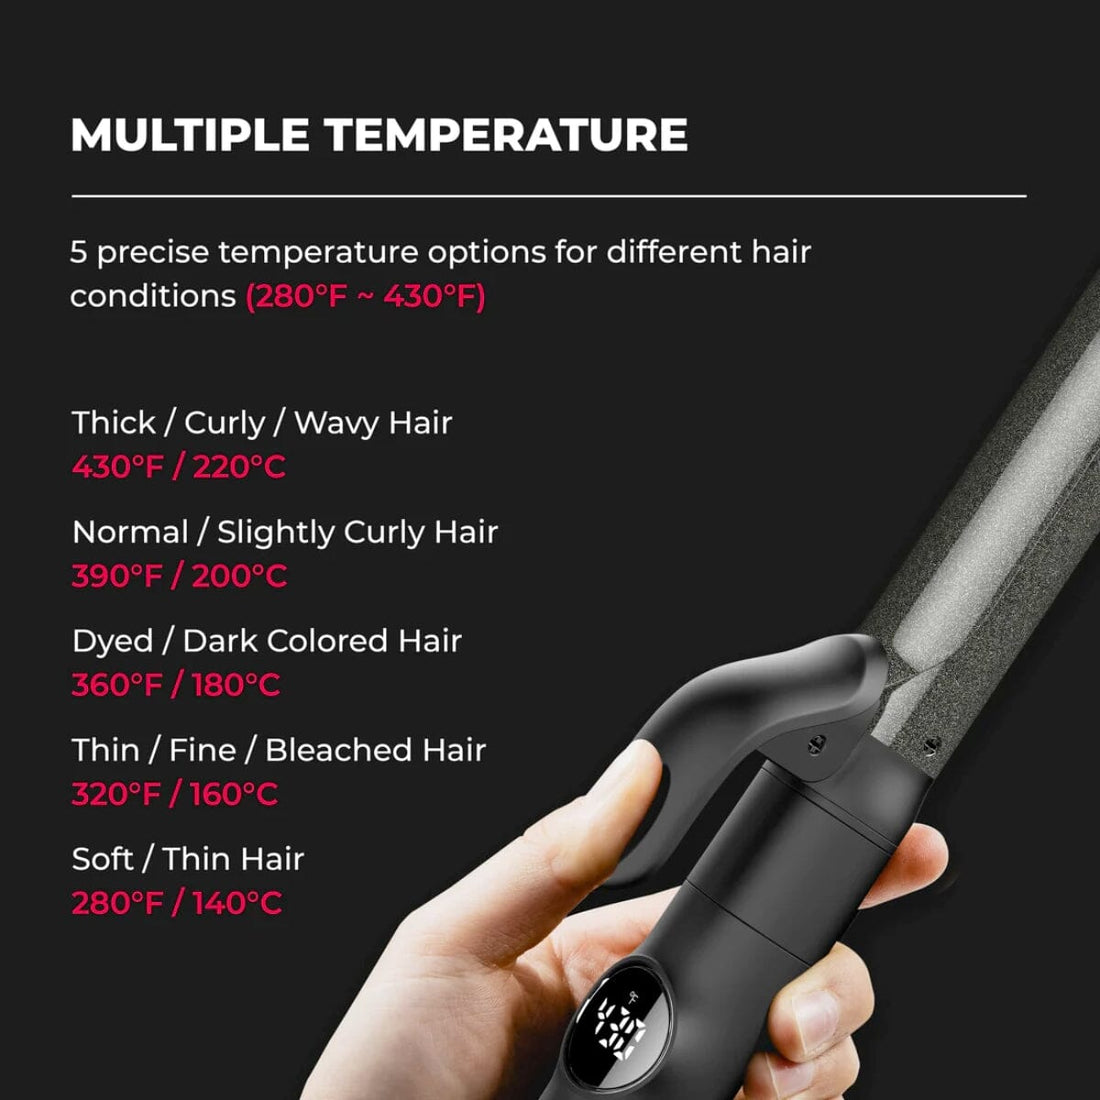 HairMNL TYMO Cues 3-in-1 Interchangeable Curling Iron Black HC-502 Temperature